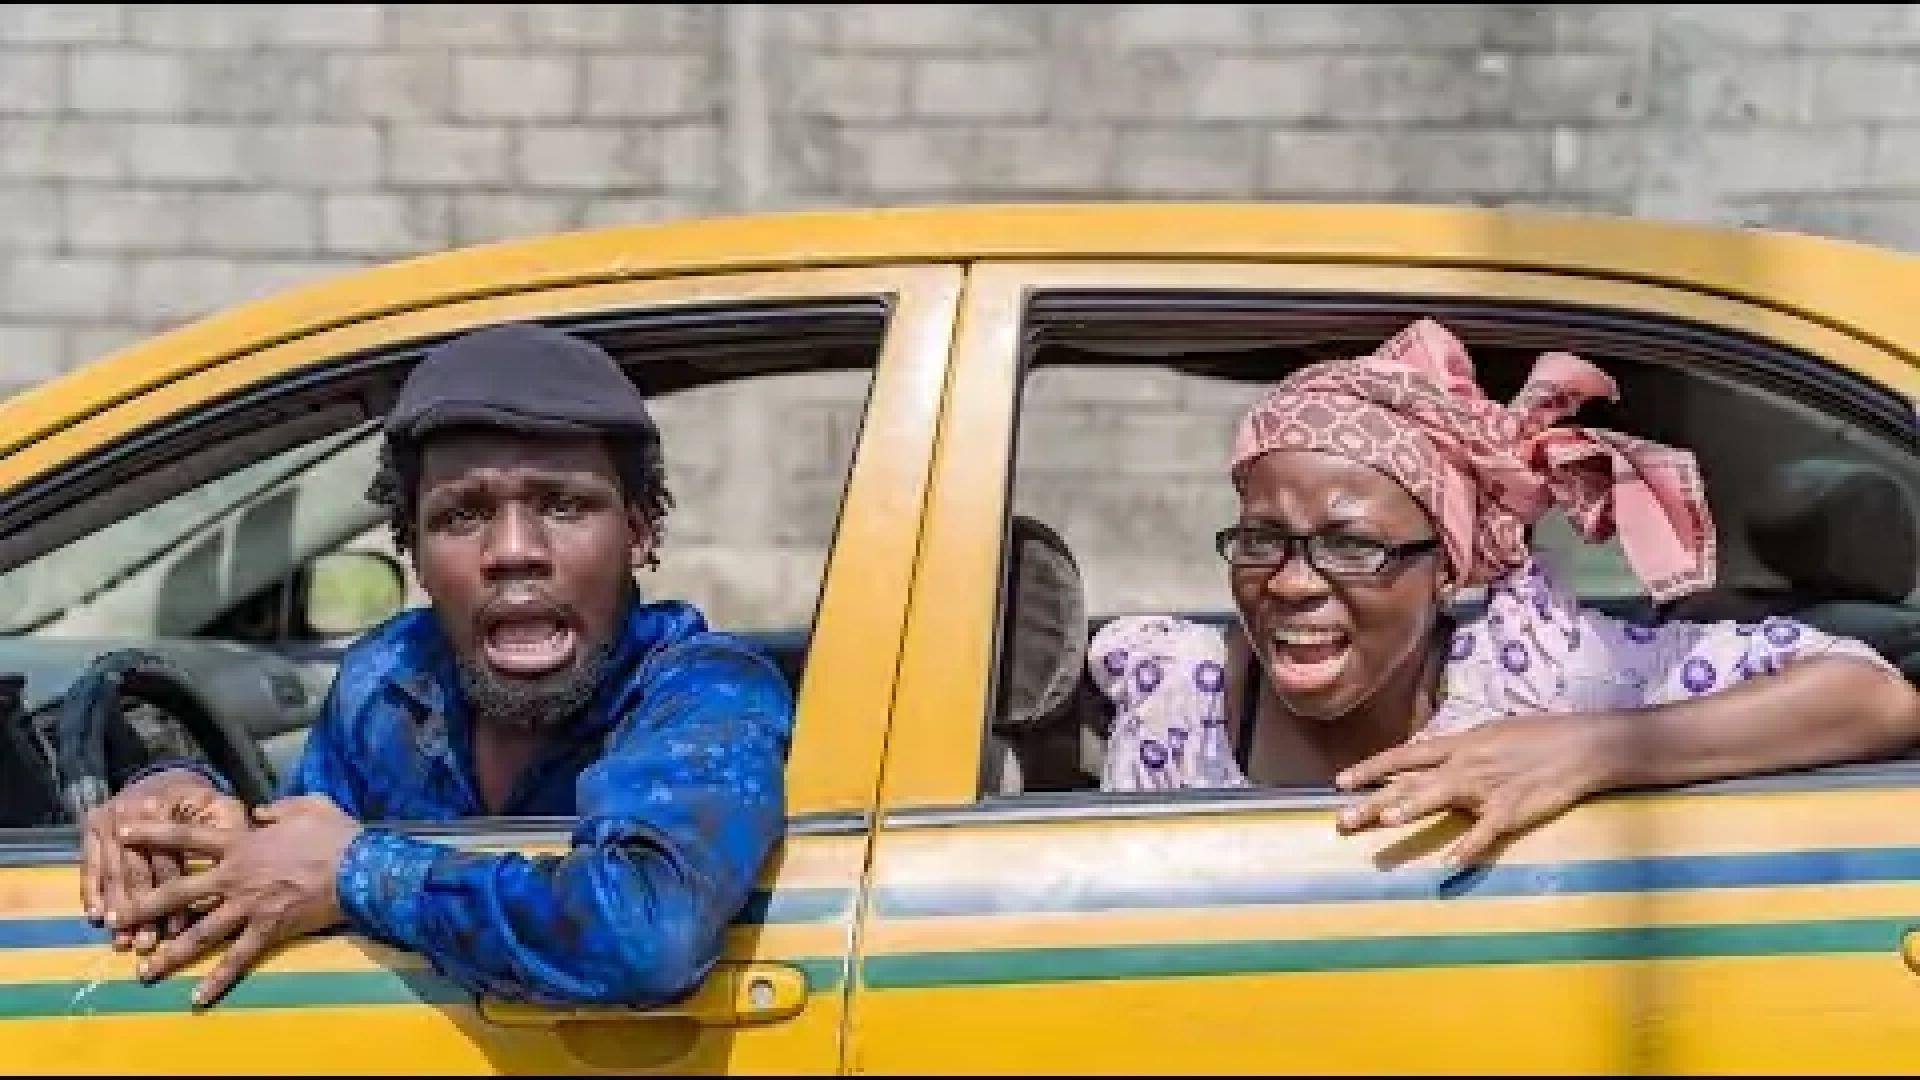 Download Comedy Video:- Officer Woos And Taaooma – African Mother In Taxi